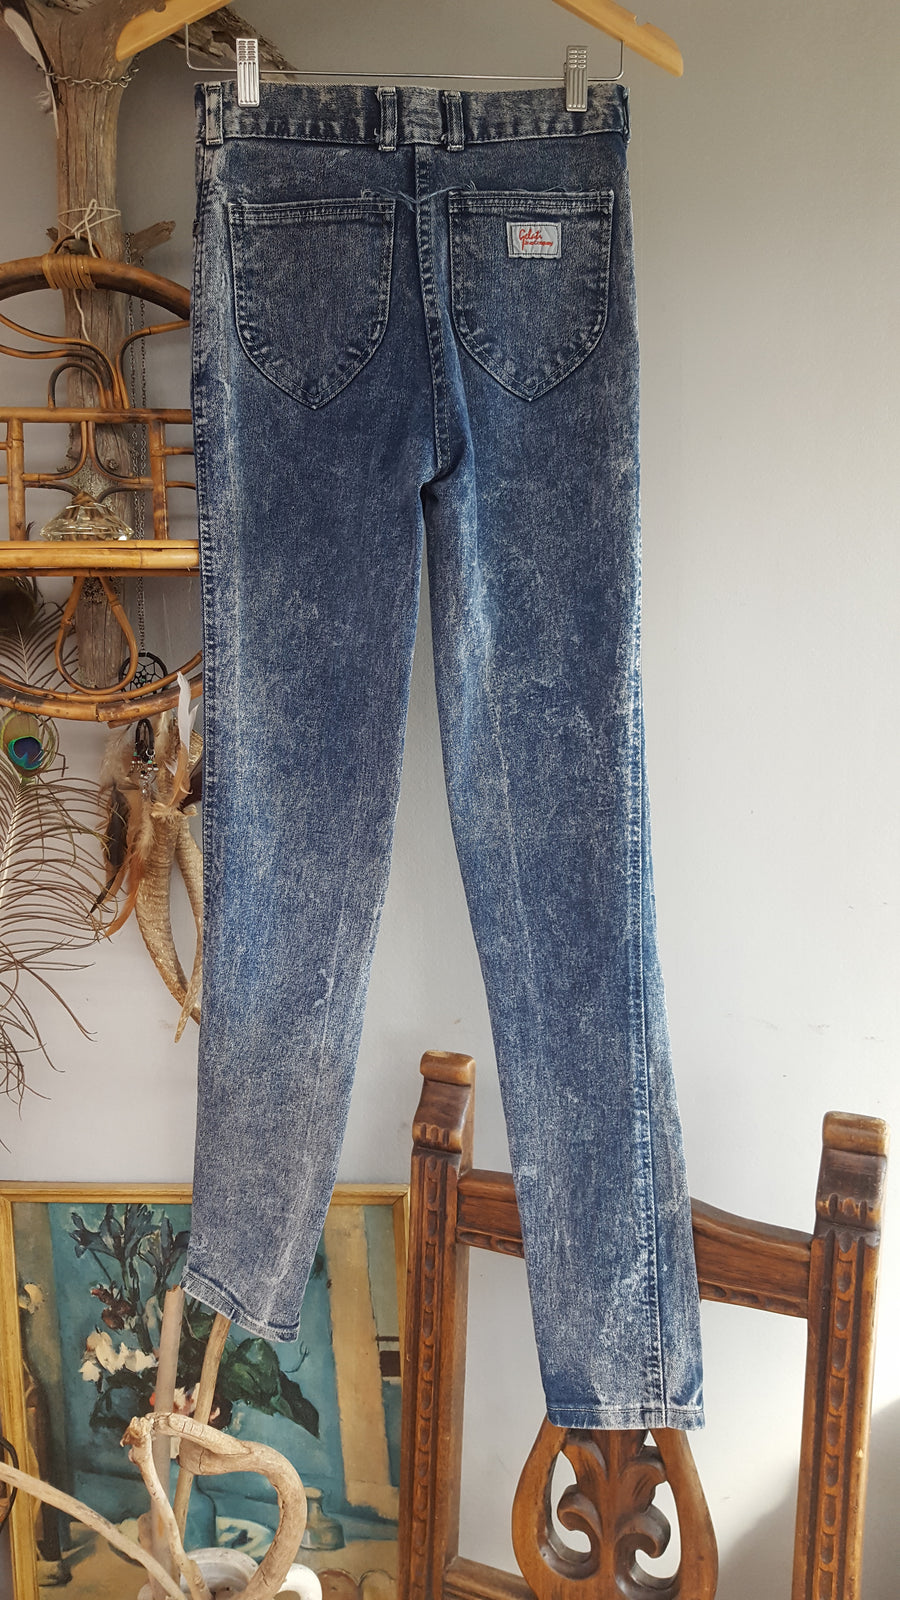 VINTAGE 80S HIGH WAISTED JEANS size 9 - Devils the Angel